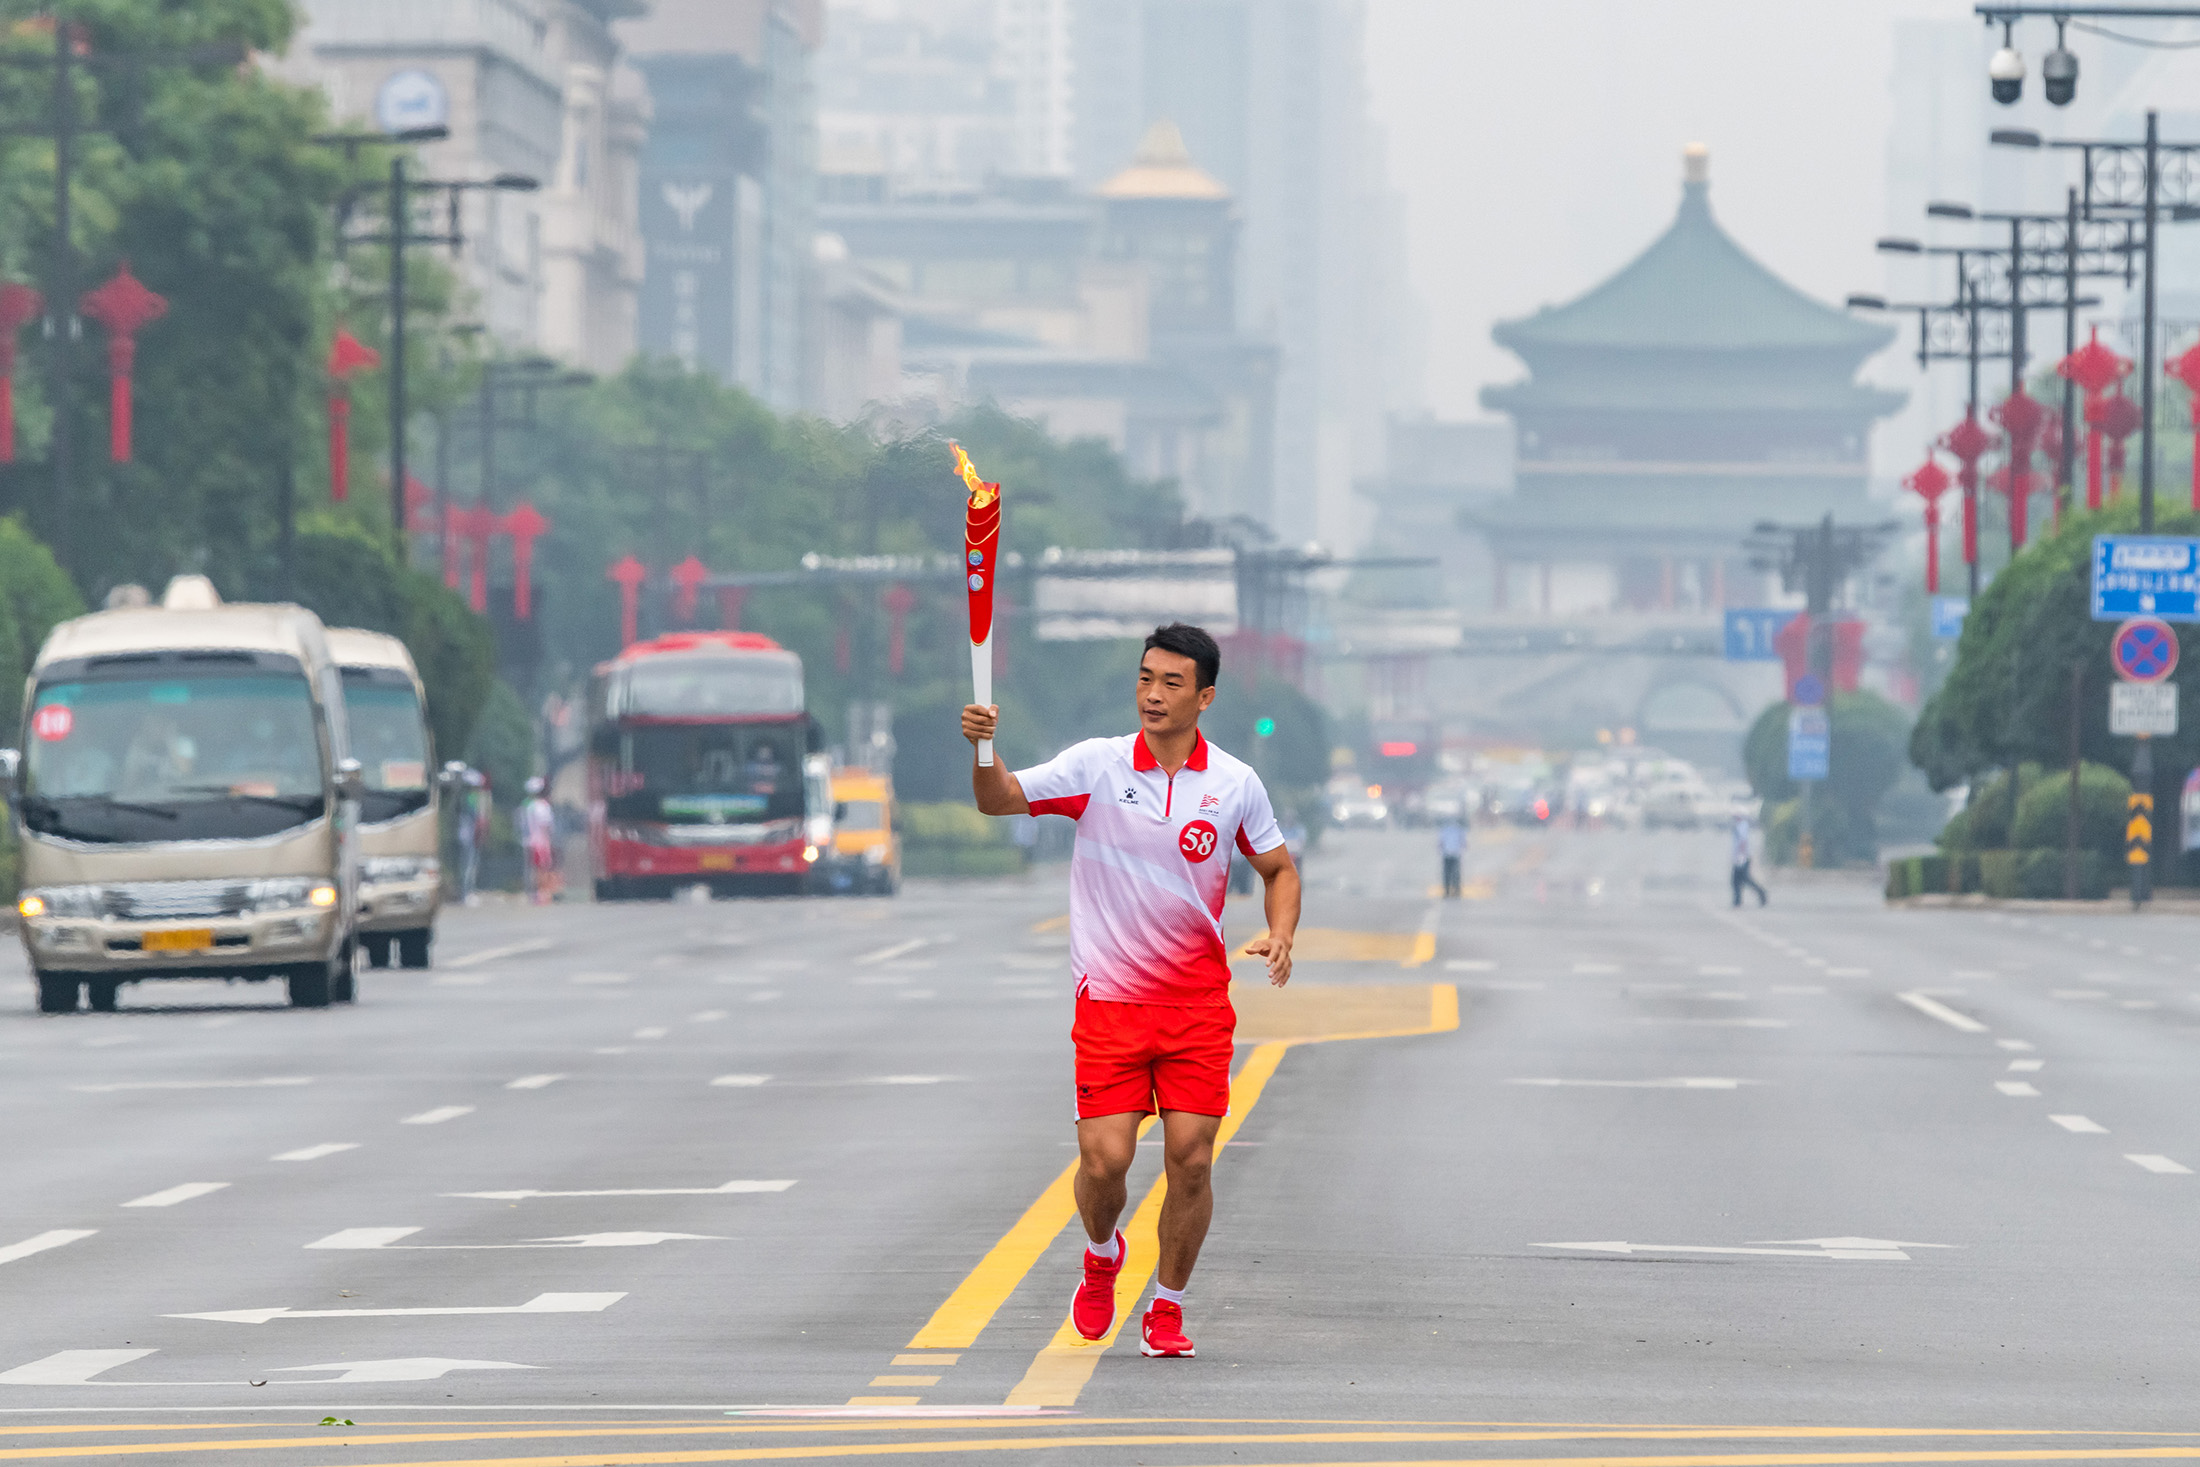 A torchbearer participates in the torch relay for China’s 14th National Games in Xi’an, on Aug. 16.